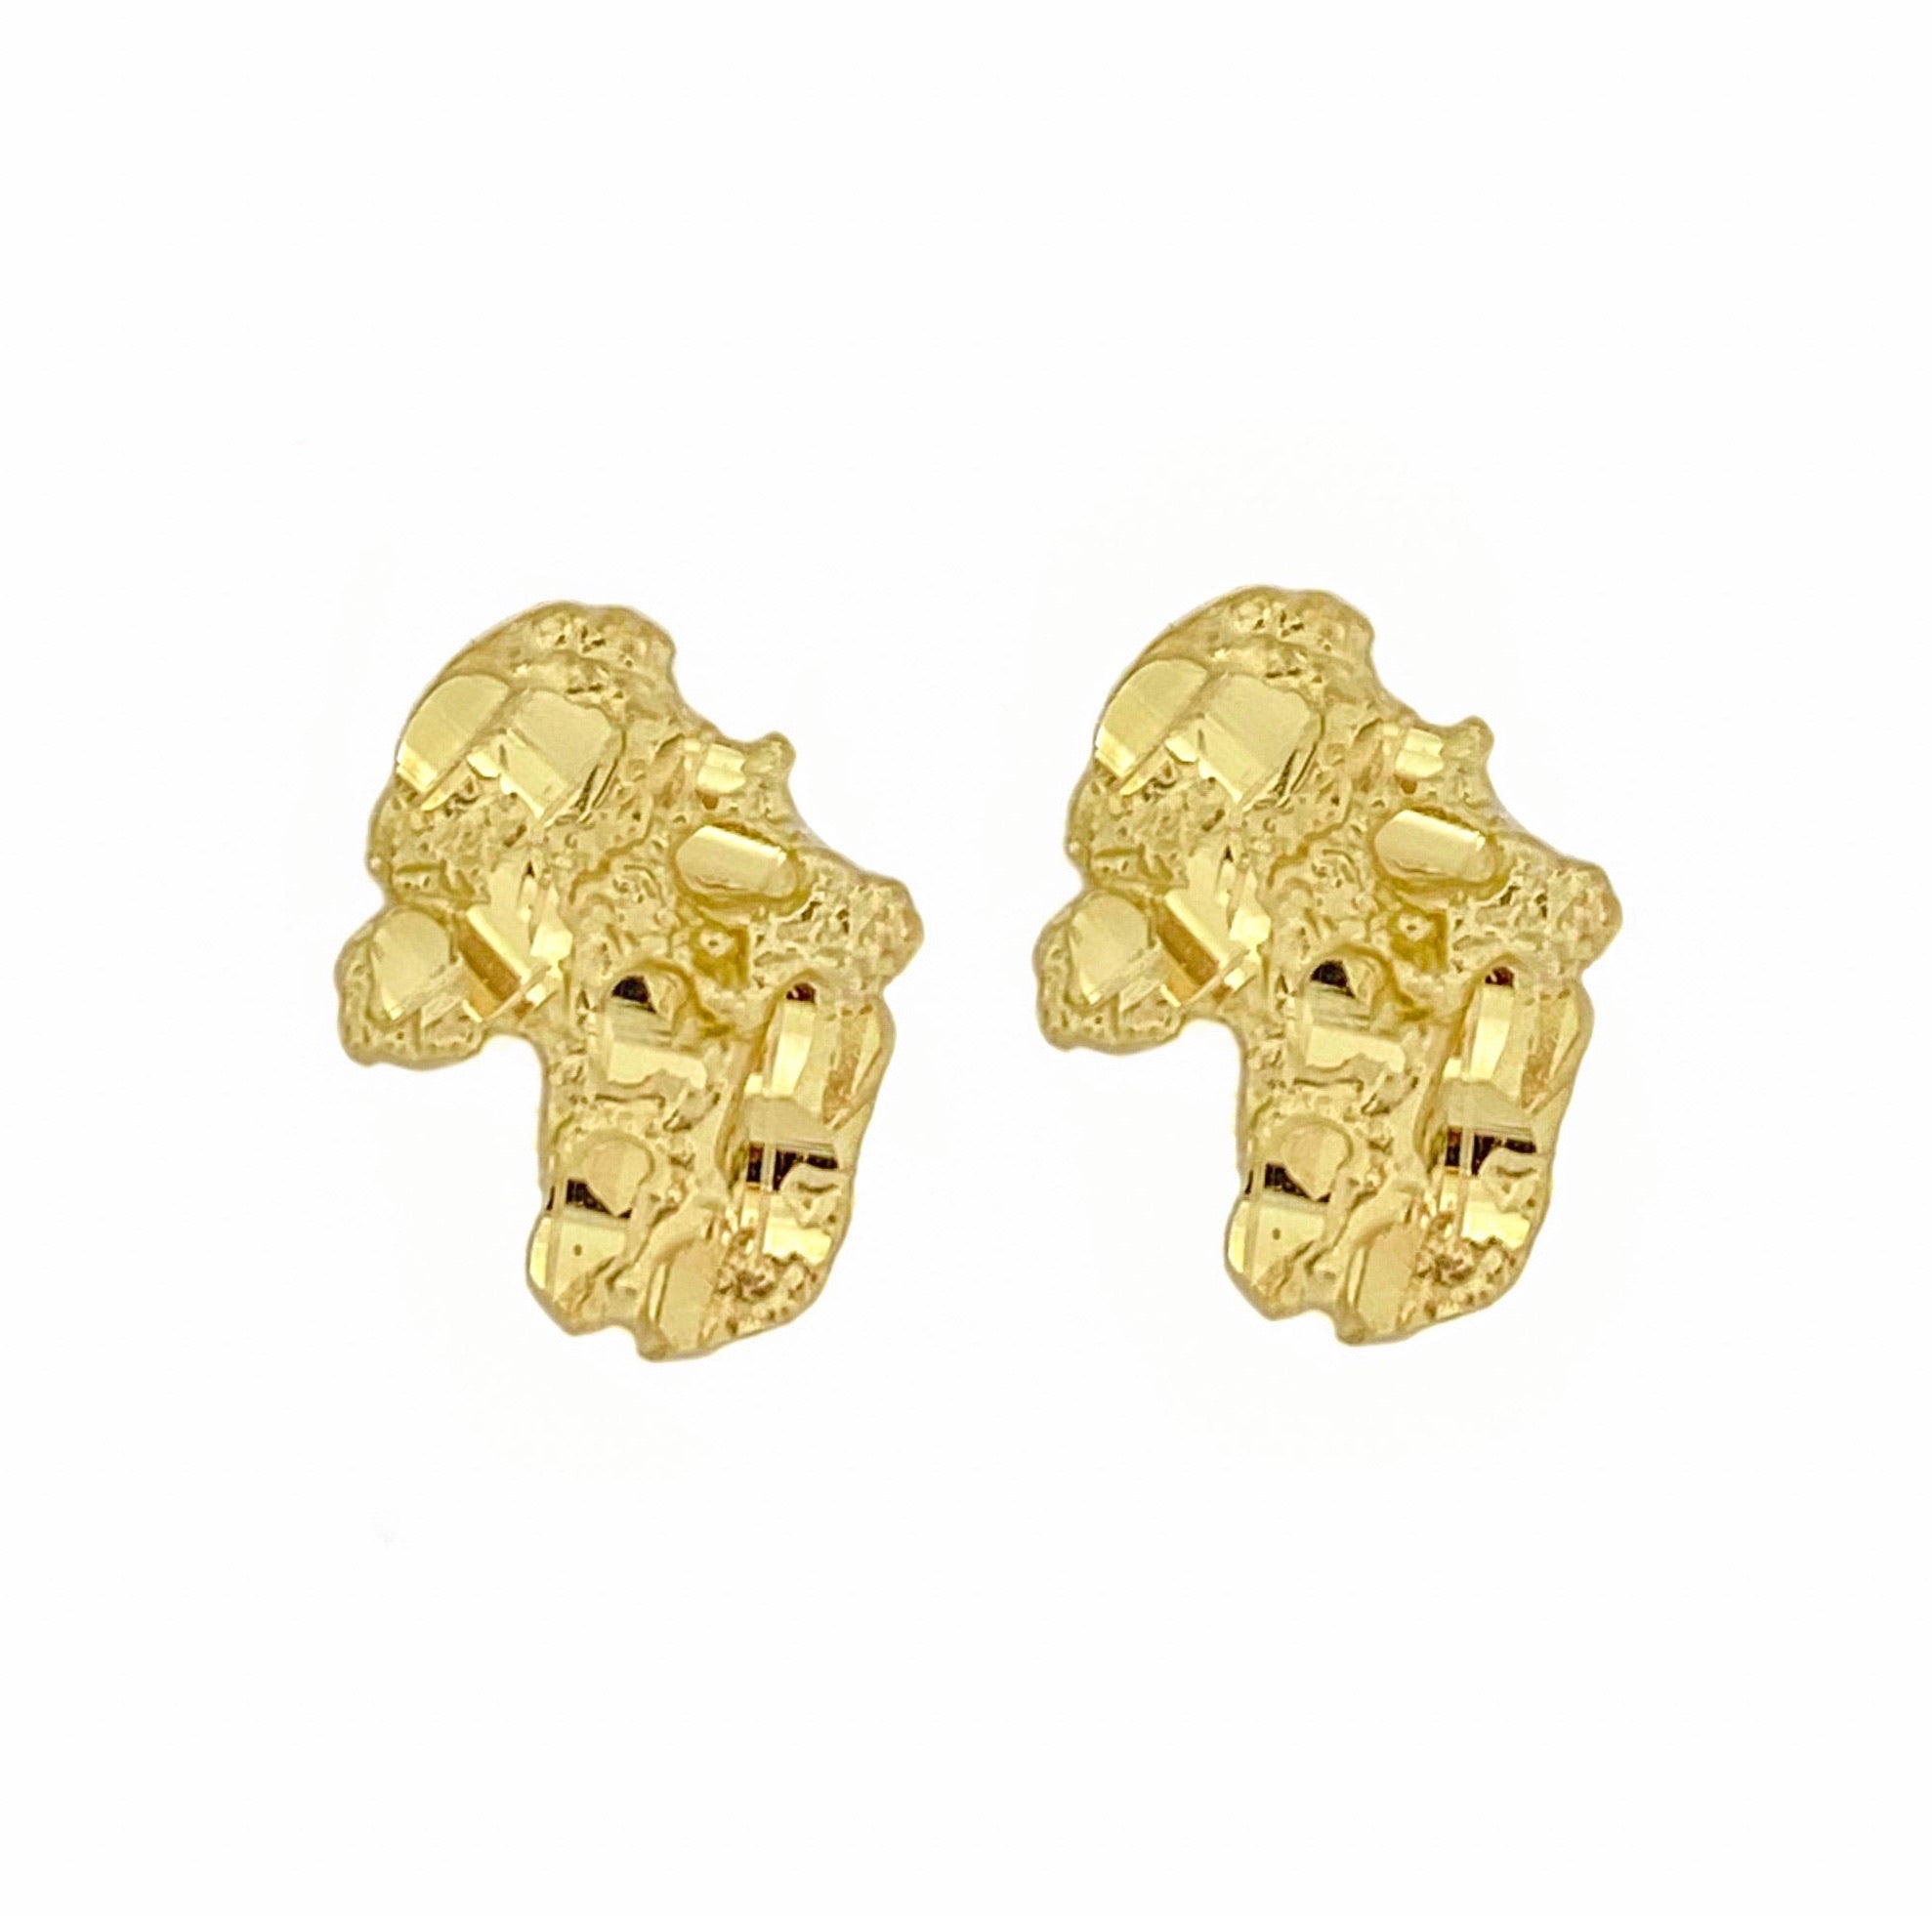 10K YELLOW GOLD NUGGET EARRINGS -SMALL